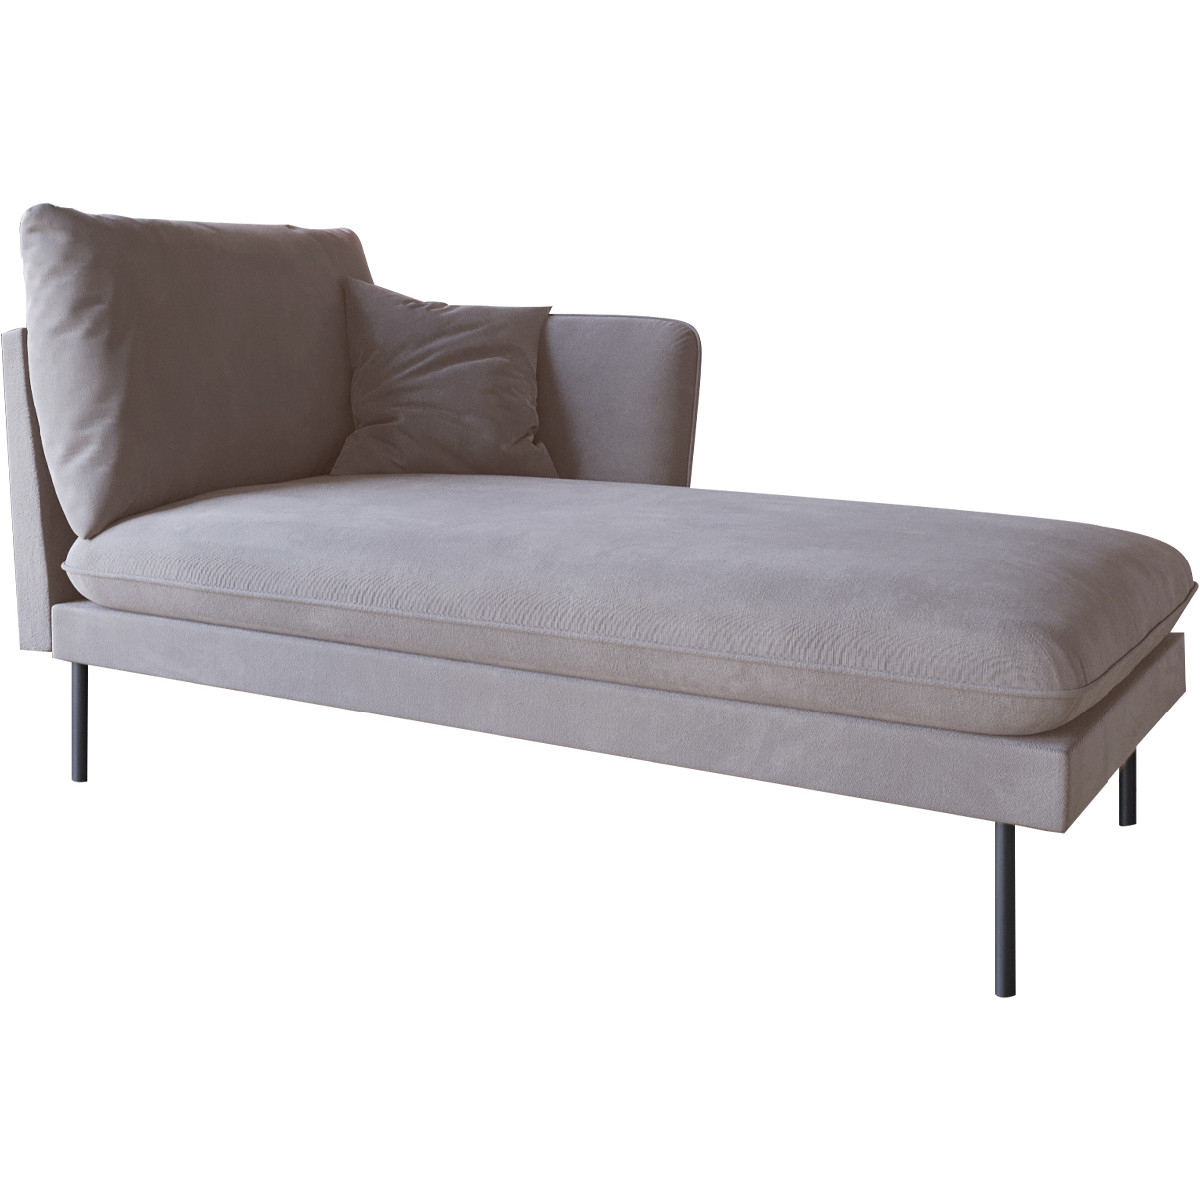 Chaise longue LAKCHOS fuego 168 right-hand